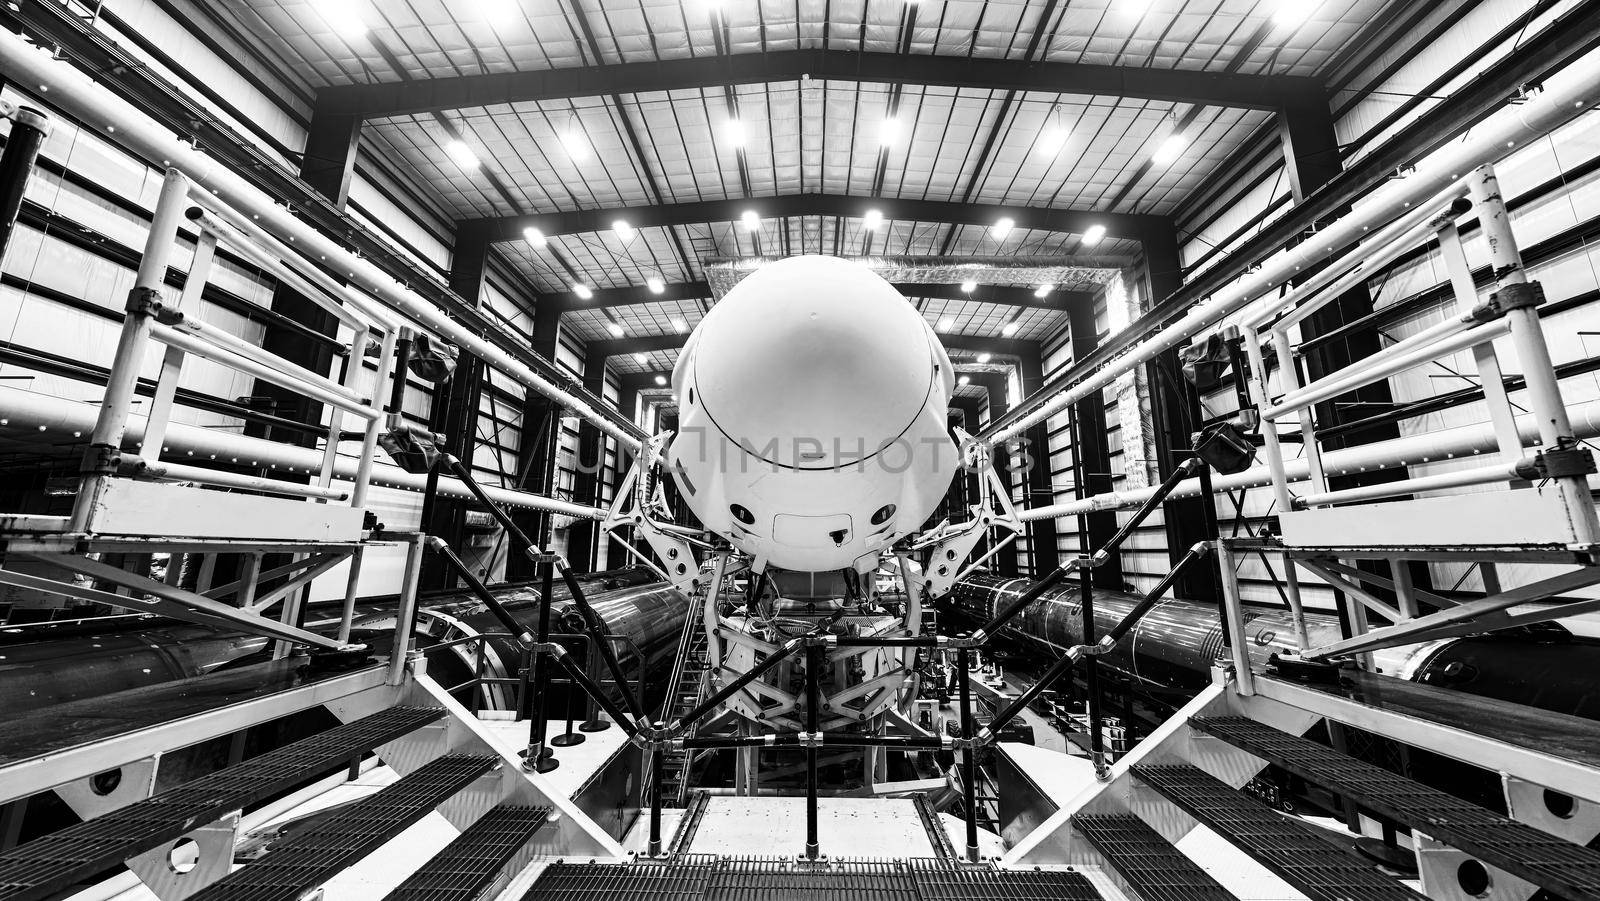 Space launch preparation. Spaceship atop the rocket, inside the hangar, just before rollout to the launchpad. Elements of this image furnished by NASA.